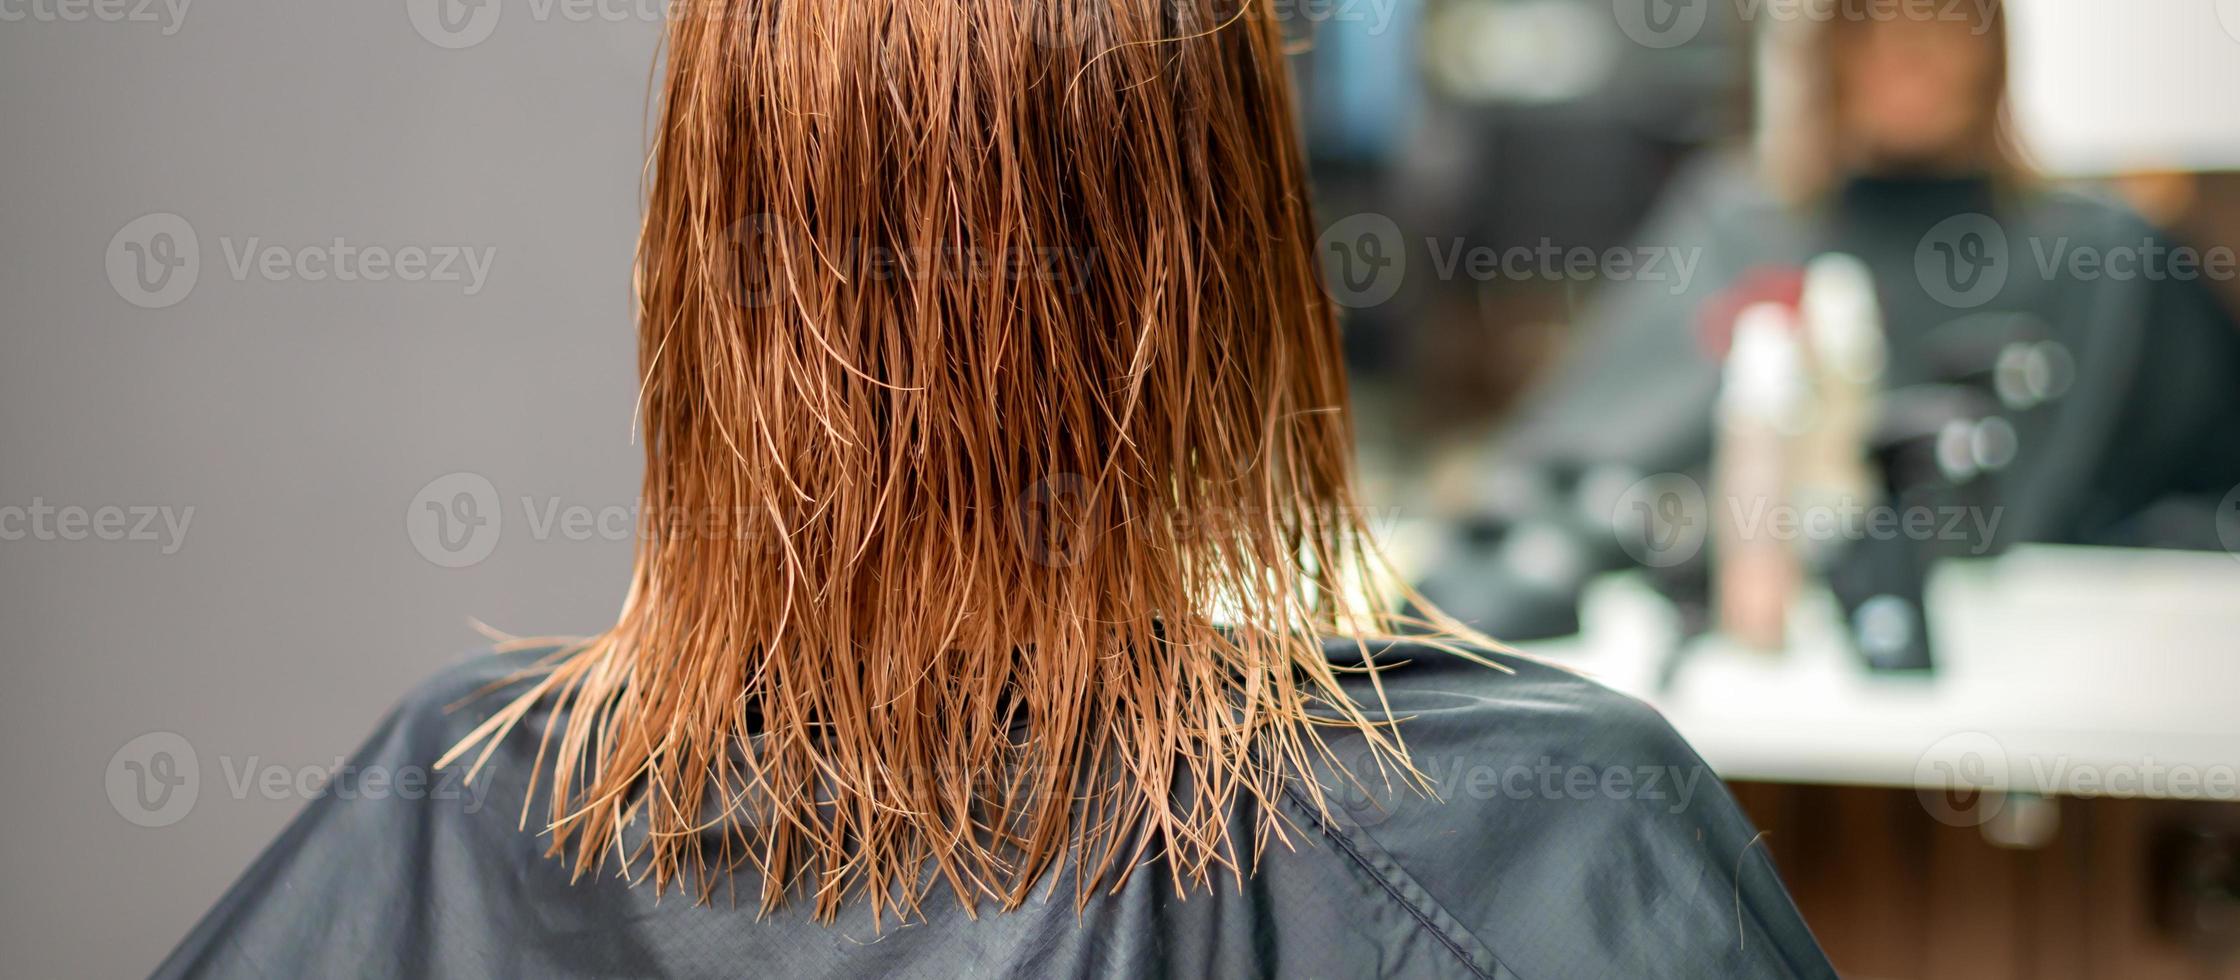 Back view of wet long red hair photo